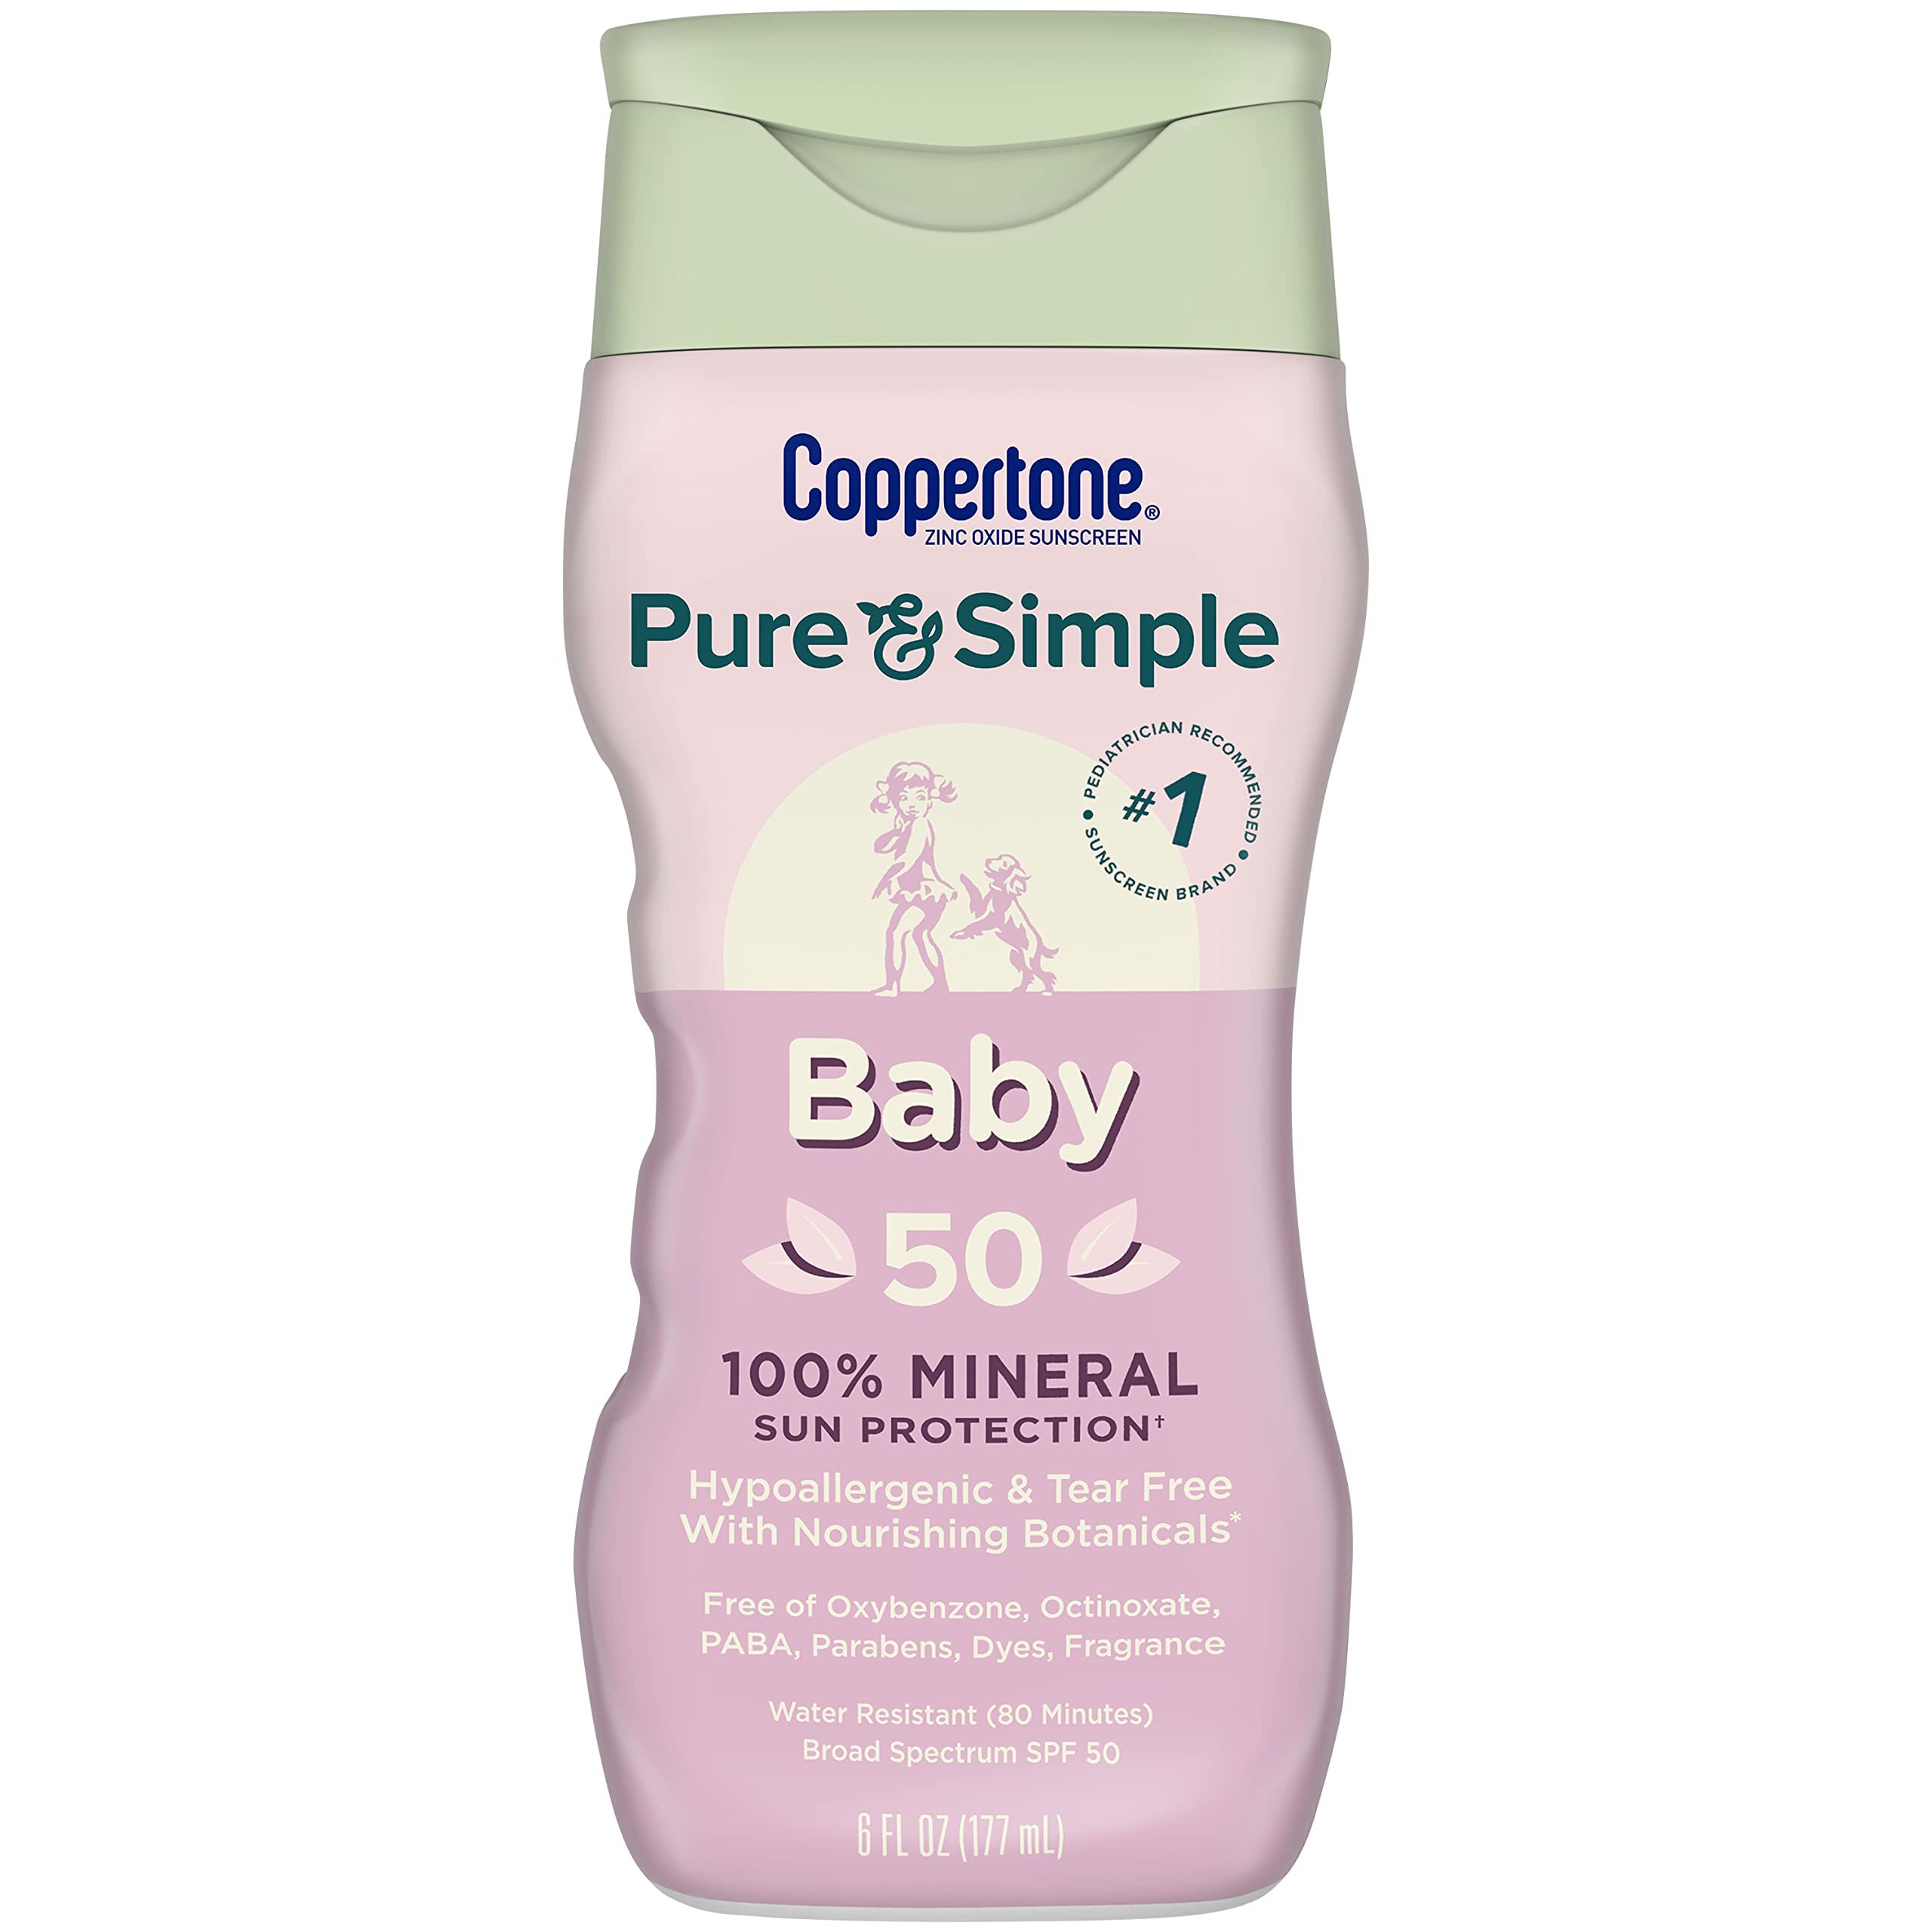 Coppertone Pure and Simple Sunscreen SPF 50 Lotion with Zinc Oxide Mineral for Babies, Tear Free, Water Resistant, Broad Spectrum, 6 Fl Oz Bottle (Pack of 18)